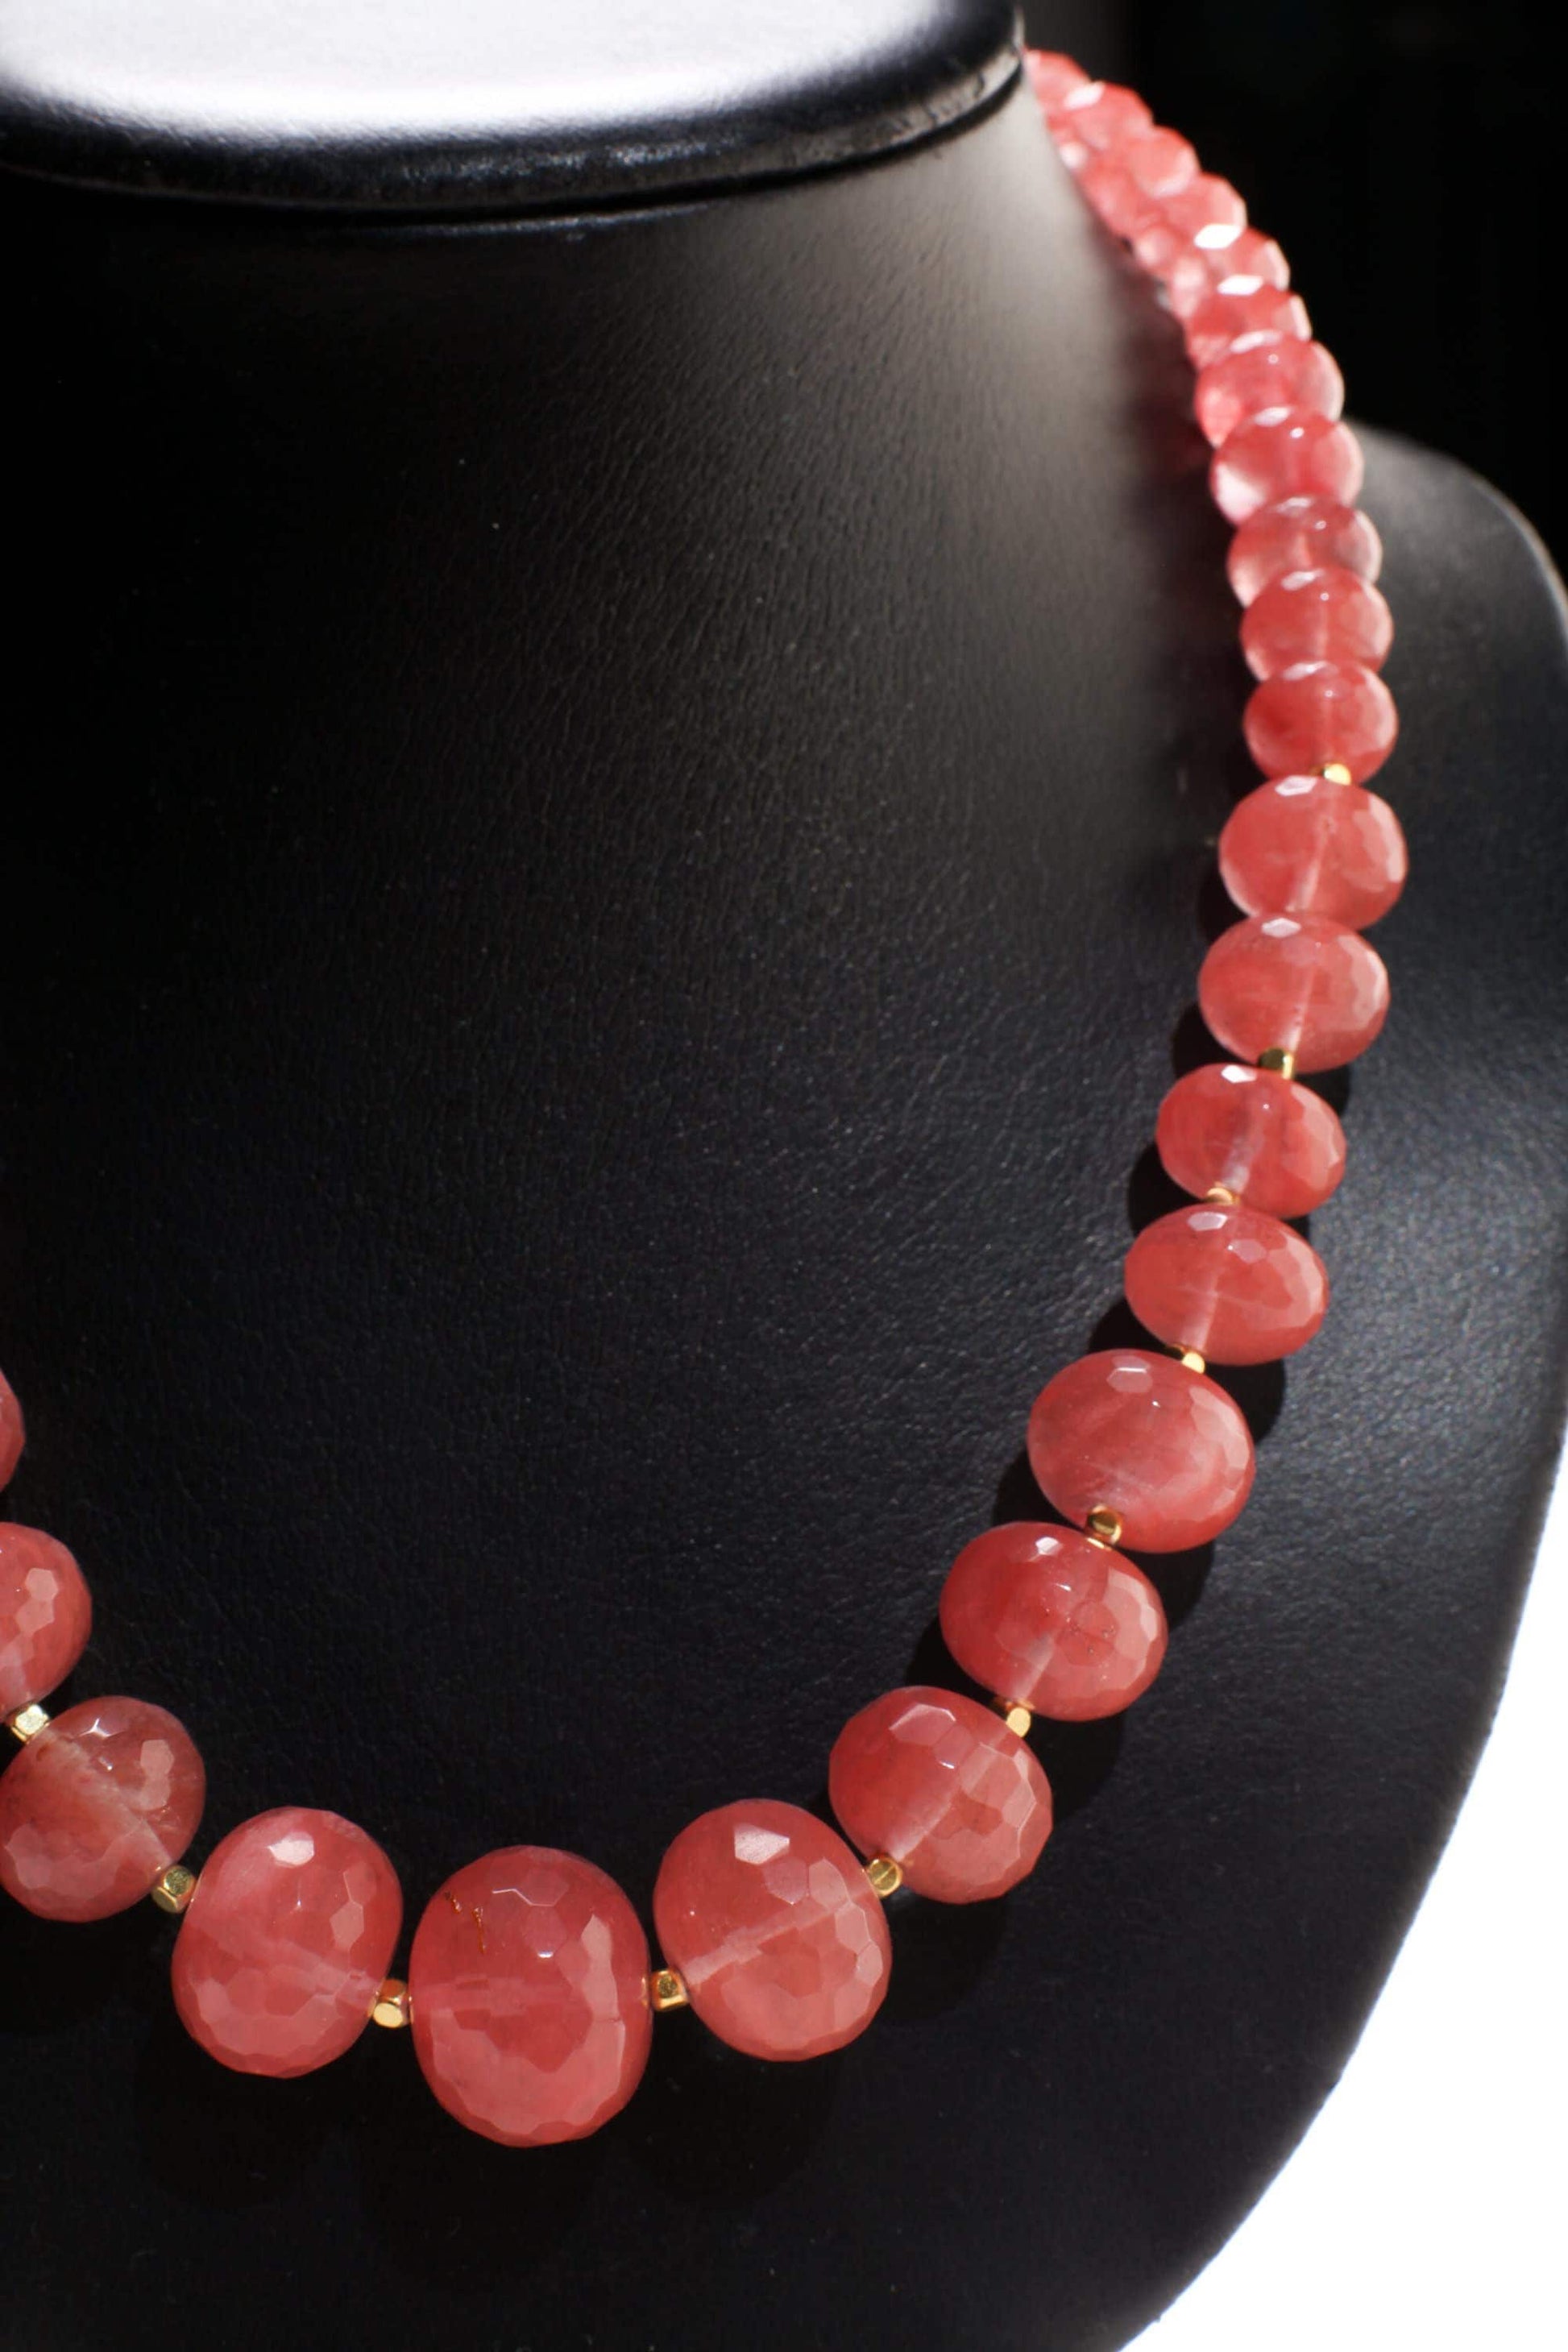 Watermelon Quartz Graduated faceted large 10-20mm Rondelle, Accents with Gold Faceted Spacer Beads 18.5&quot; Necklace.Gift